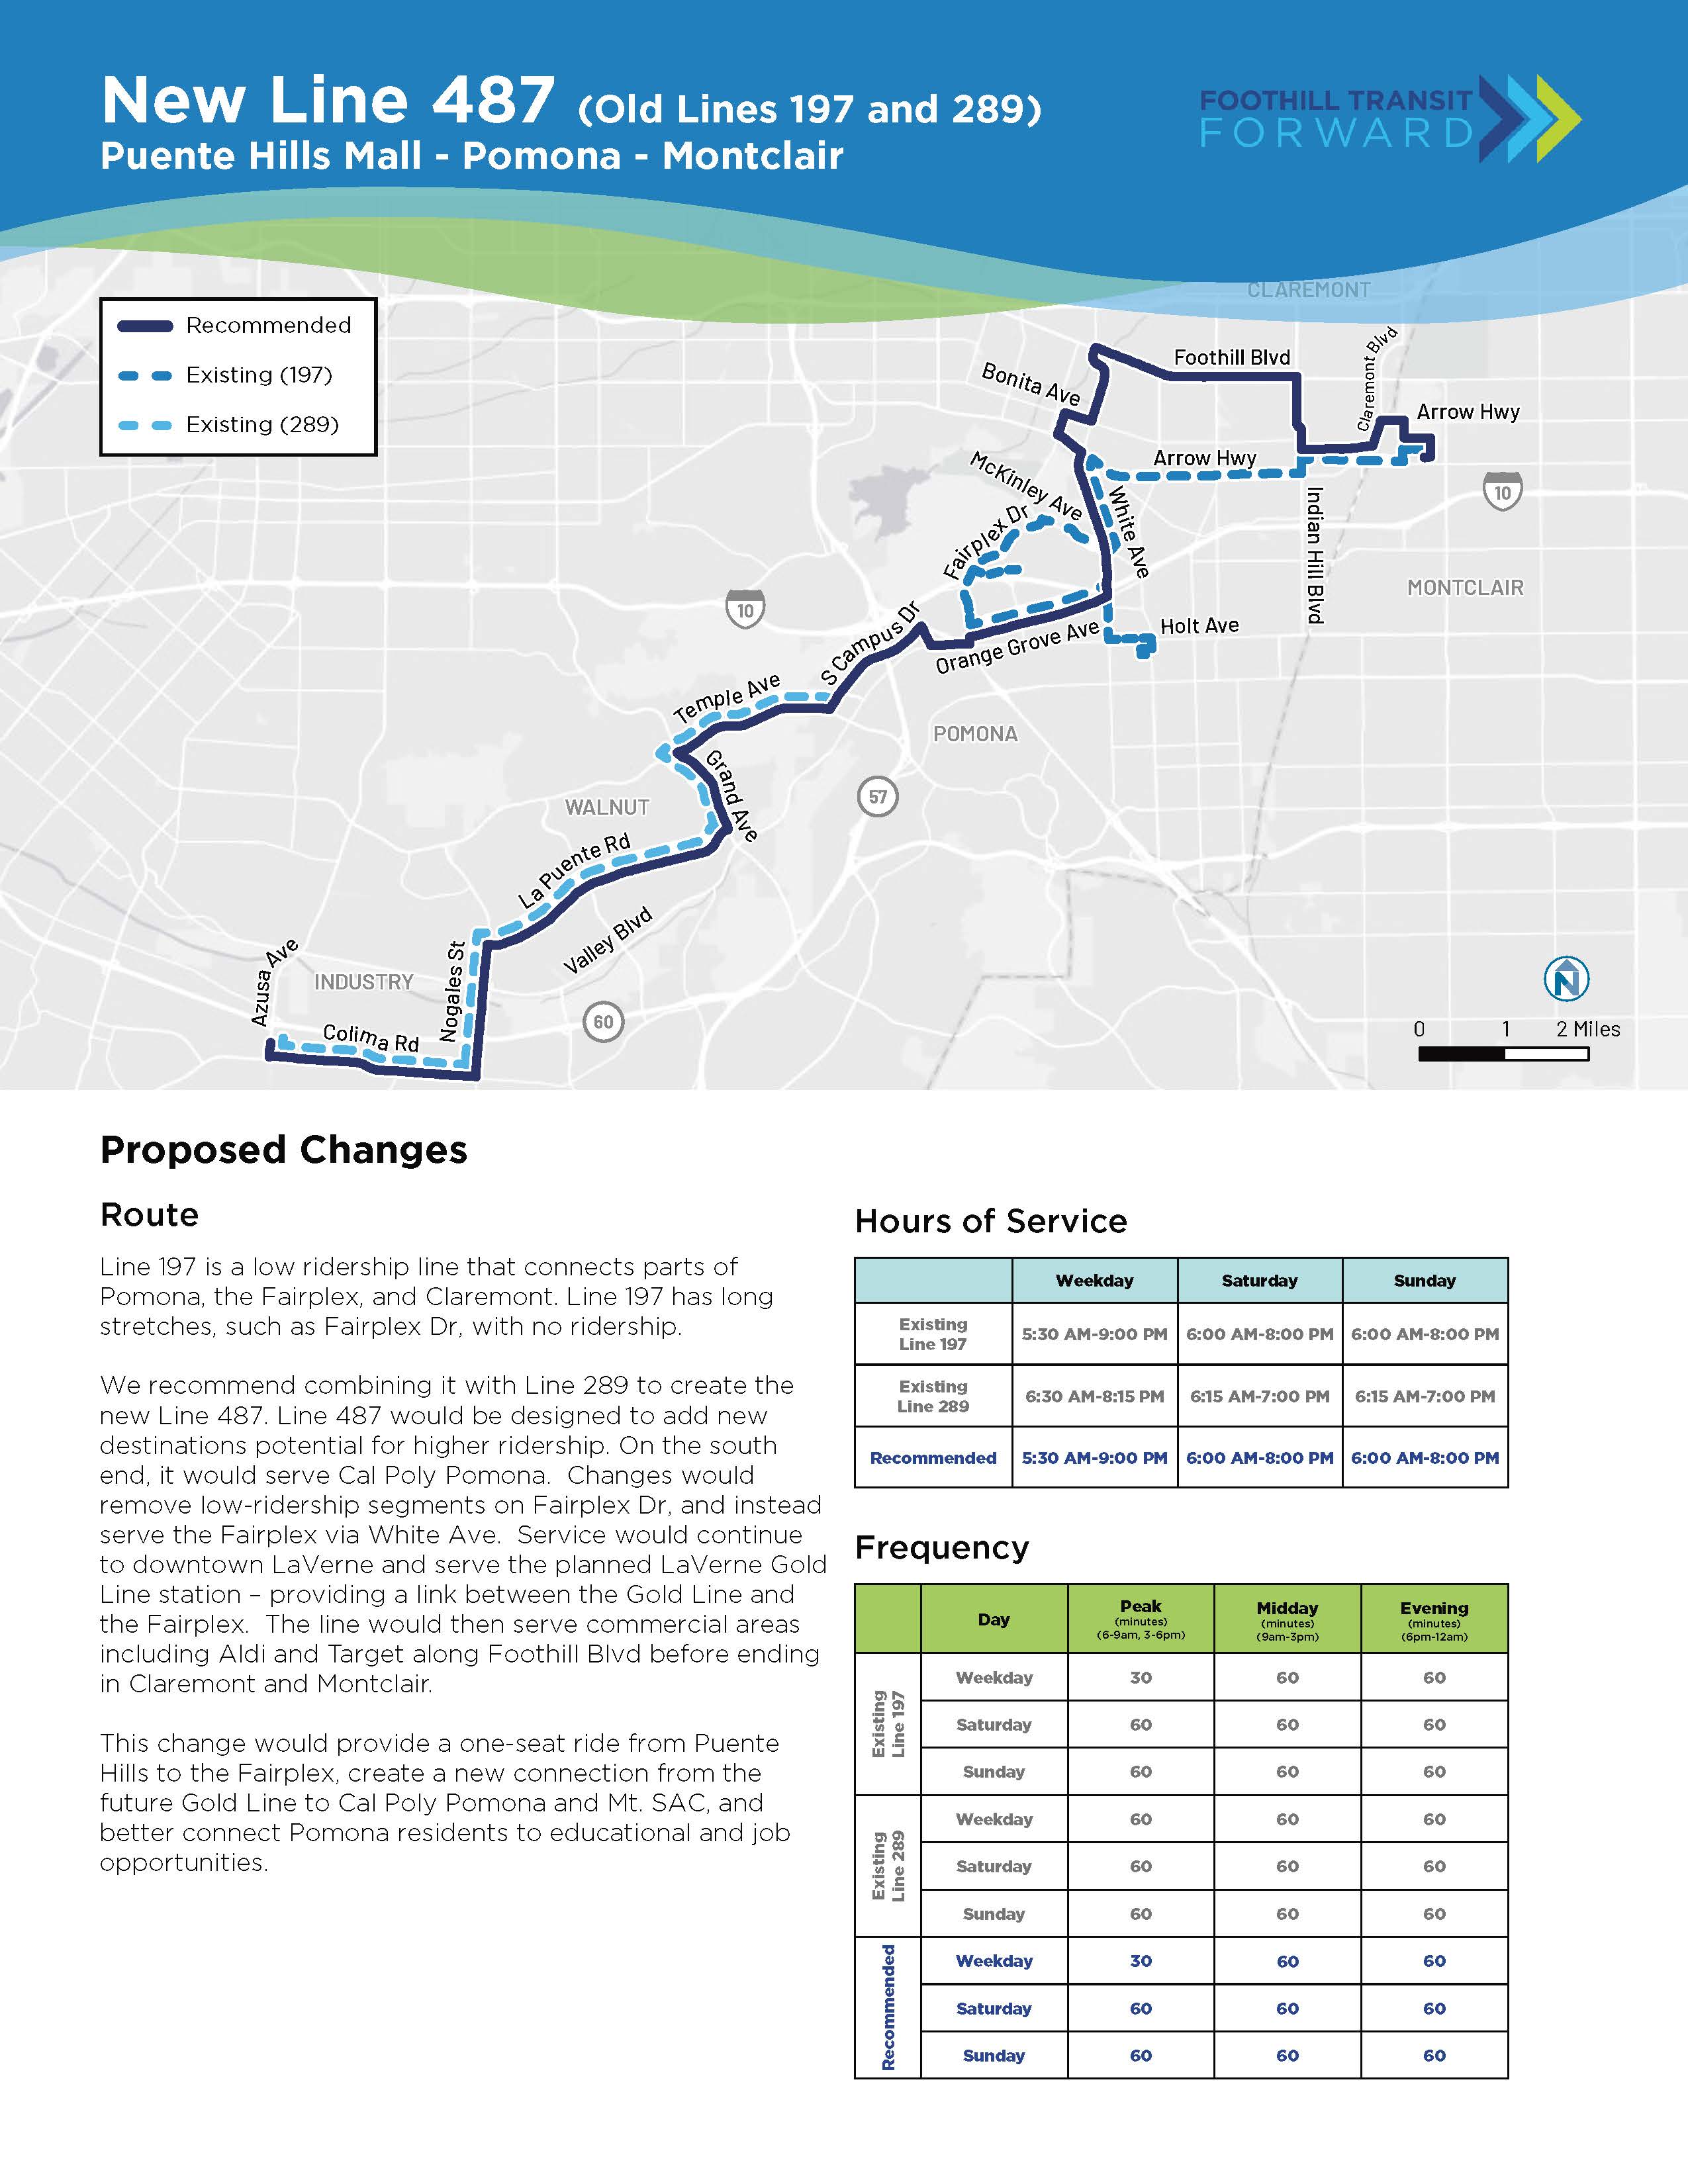 We recommend combining low ridership Line 197 with Line 289 to create the new Line 487. Line 487 would add new higher ridership destinations like Cal Poly Pomona. Changes would replace low-ridership segments on Fairplex Dr with service to the Fairplex via White Ave. Service would include the planned LaVerne Gold Line station, providing a link between the Gold Line and the Fairplex.  The line would then serve commercial areas including Aldi and Target along Foothill Blvd, ending in Claremont and Montclair.